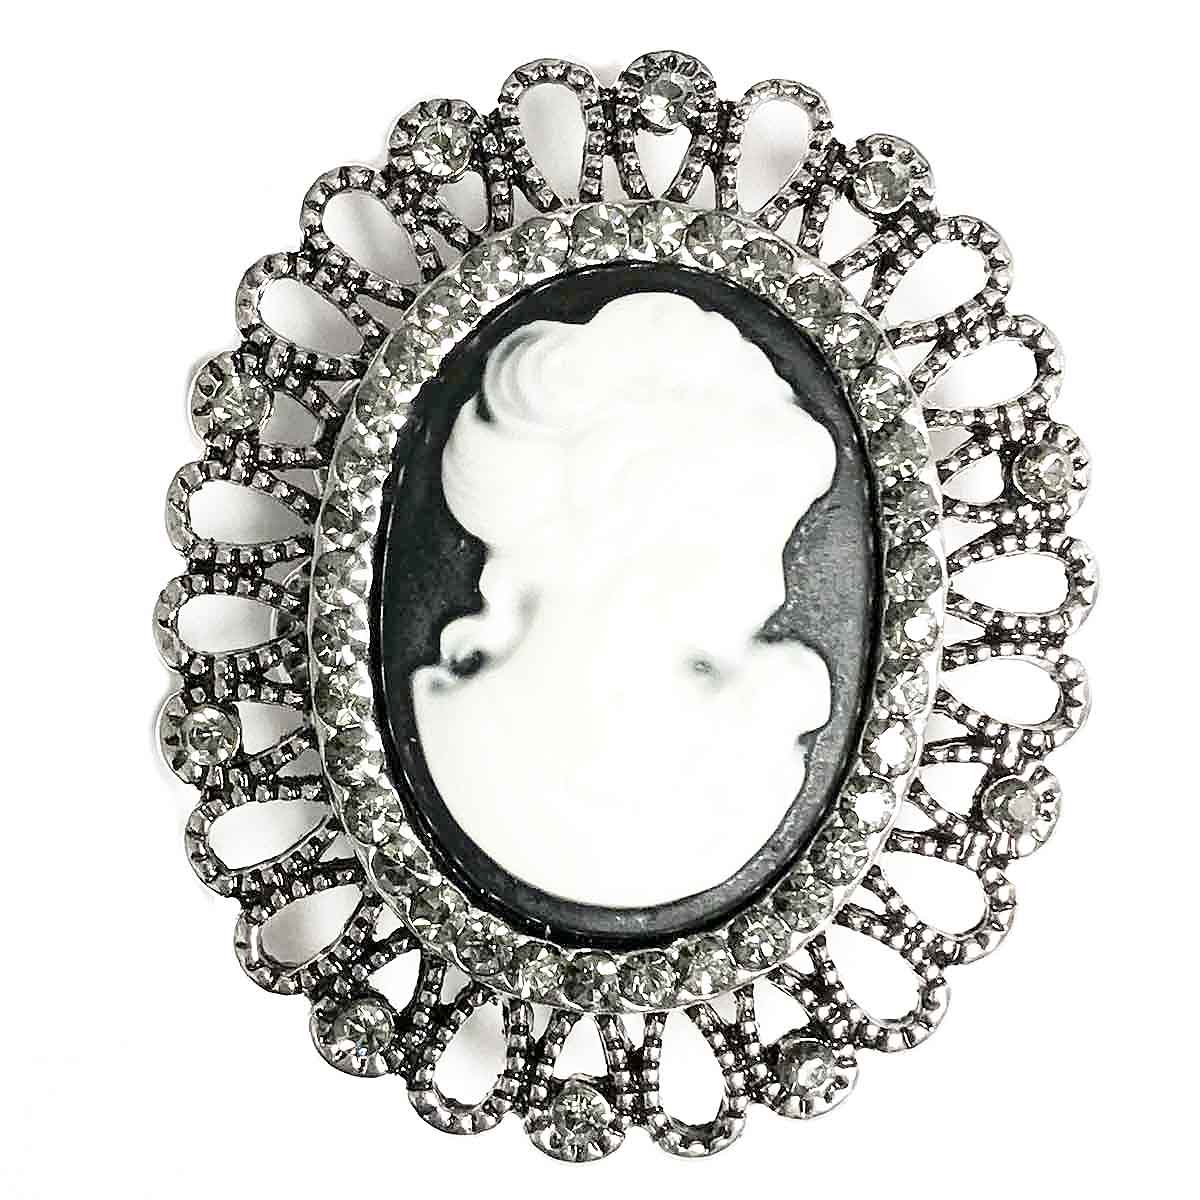 White cameo on black set in antique-like crystal loop. Oval. Magnetic Brooch for Scarves Artistic Sculptural shapes add a personality to absolutely anything you wish to put your stamp on! The Super Strong Magnet is enough for a jacket lapel! Use to hold a sarong or cardigan together.  Great to adorn a hat or to hold a scarf in place with Fabric Safe Magnet.